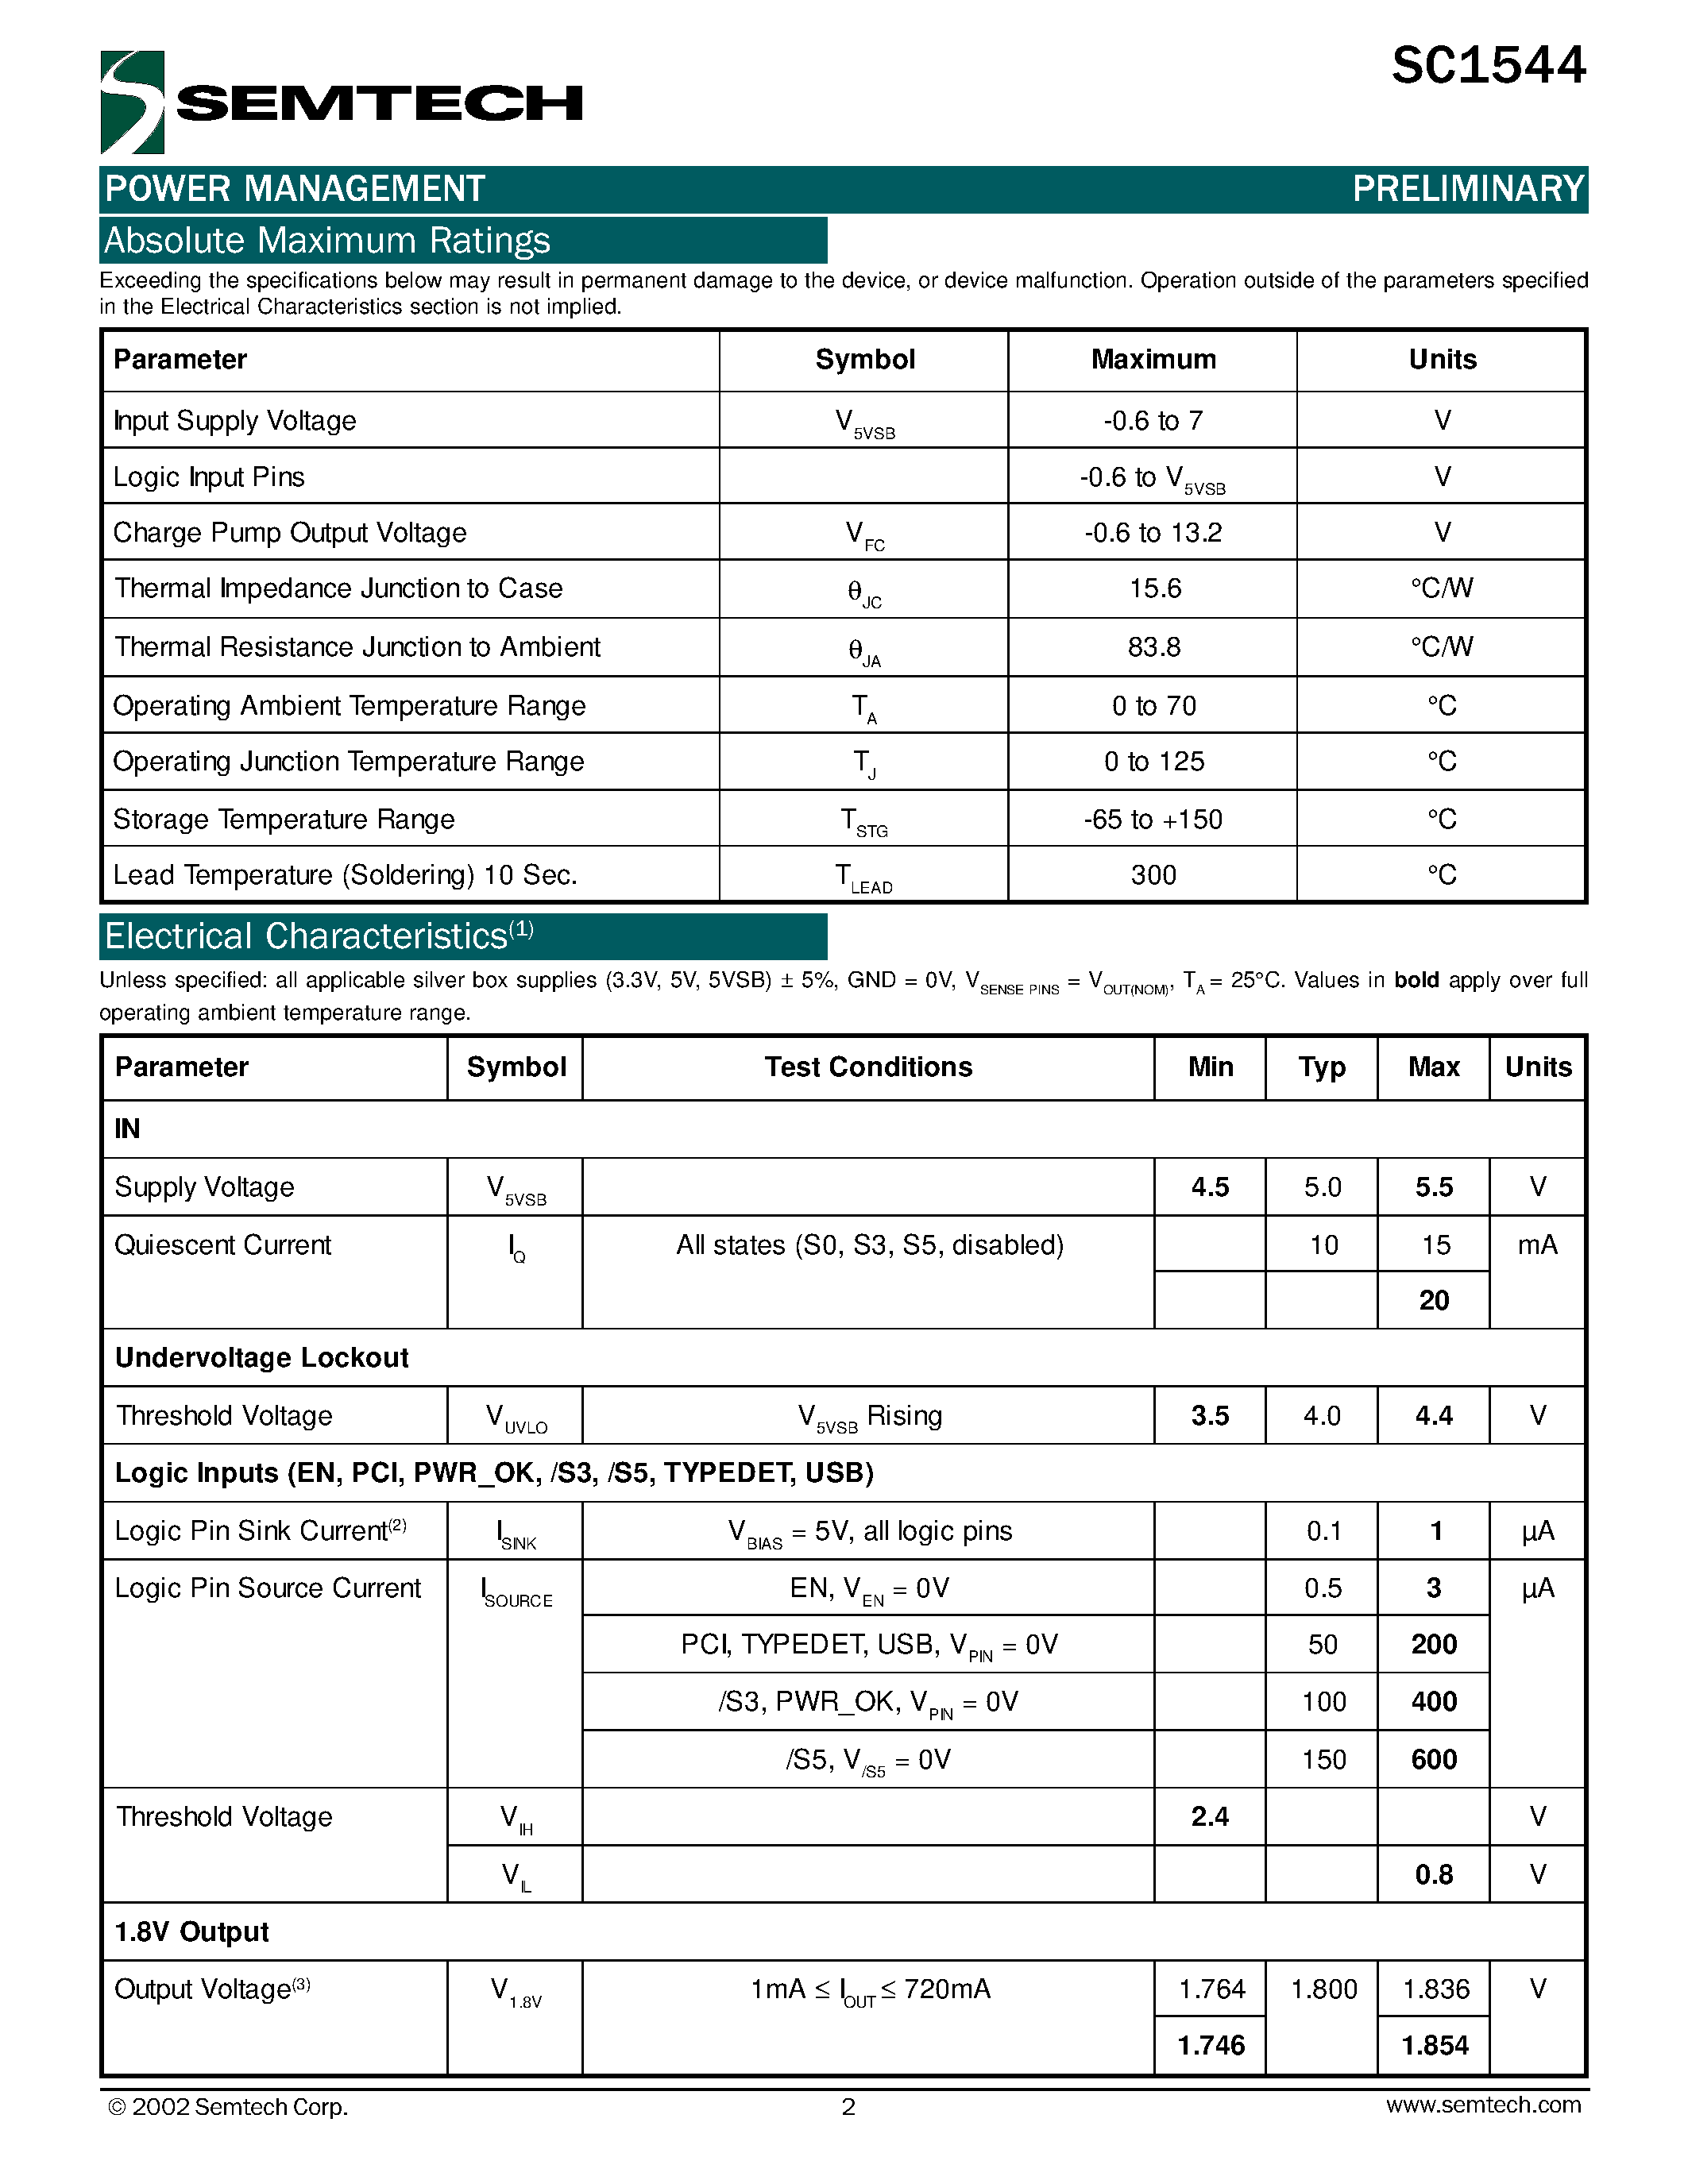 Datasheet SC1544TS-X.XTR - ACPI Controller for Advanced Motherboards page 2